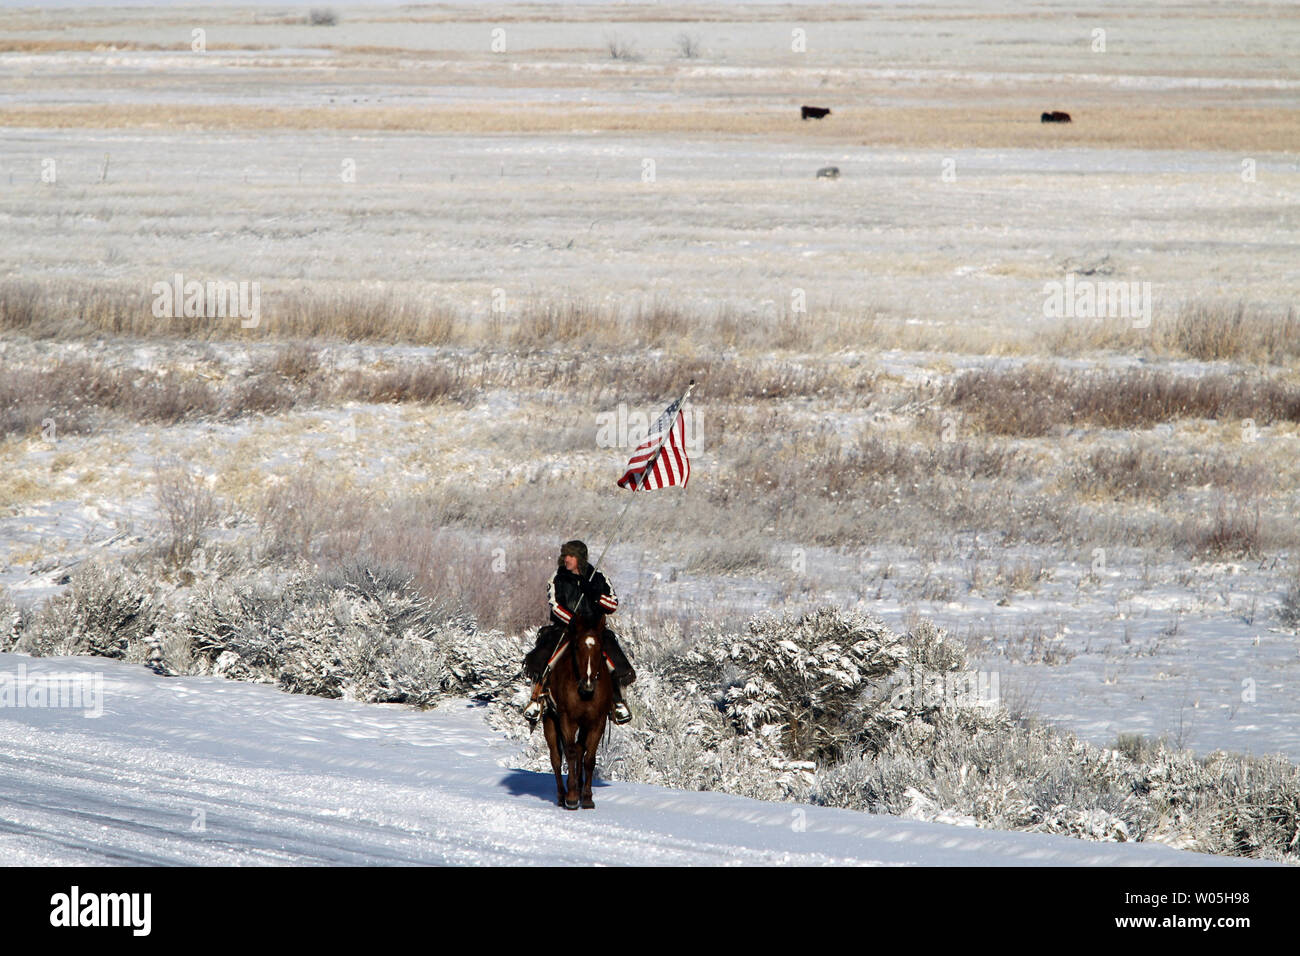 Duane Ehmer, of Irrigon, Oregon, rides the perimeter on Hellboy, at the Malheur National Wildlife Reserve on January 15, 2016 in Burns, Oregon. Ehmer has been pulling sentry duty during the takeover. Ammon Bundy and about 20 other protesters took over the refuge on Jan. 2 after a rally to support the imprisoned local ranchers Dwight Hammond Jr., and his son, Steven Hammond.      Photo by Jim Bryant/UPI Stock Photo